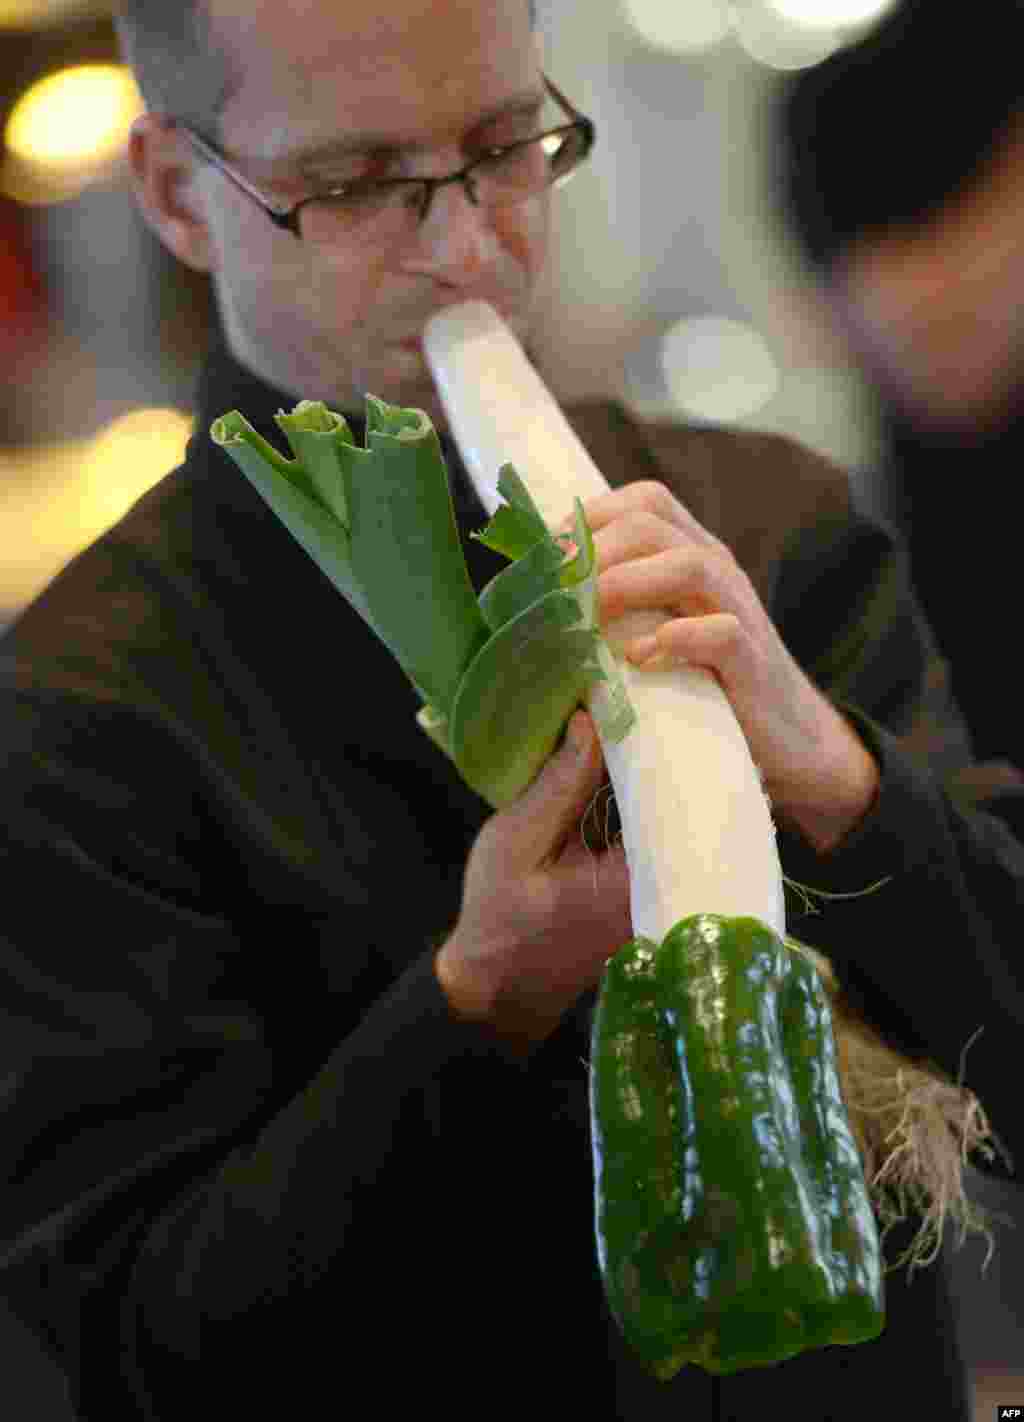 A musician of the Vienna Vegetable Orchestra who plays music exclusively with vegetable instruments (carrots and cucumbers instead of guitars and drums) prepares his instruments before a concert for the 100th anniversary of the San Miguel market in Madrid, Spain, May 13, 2013.